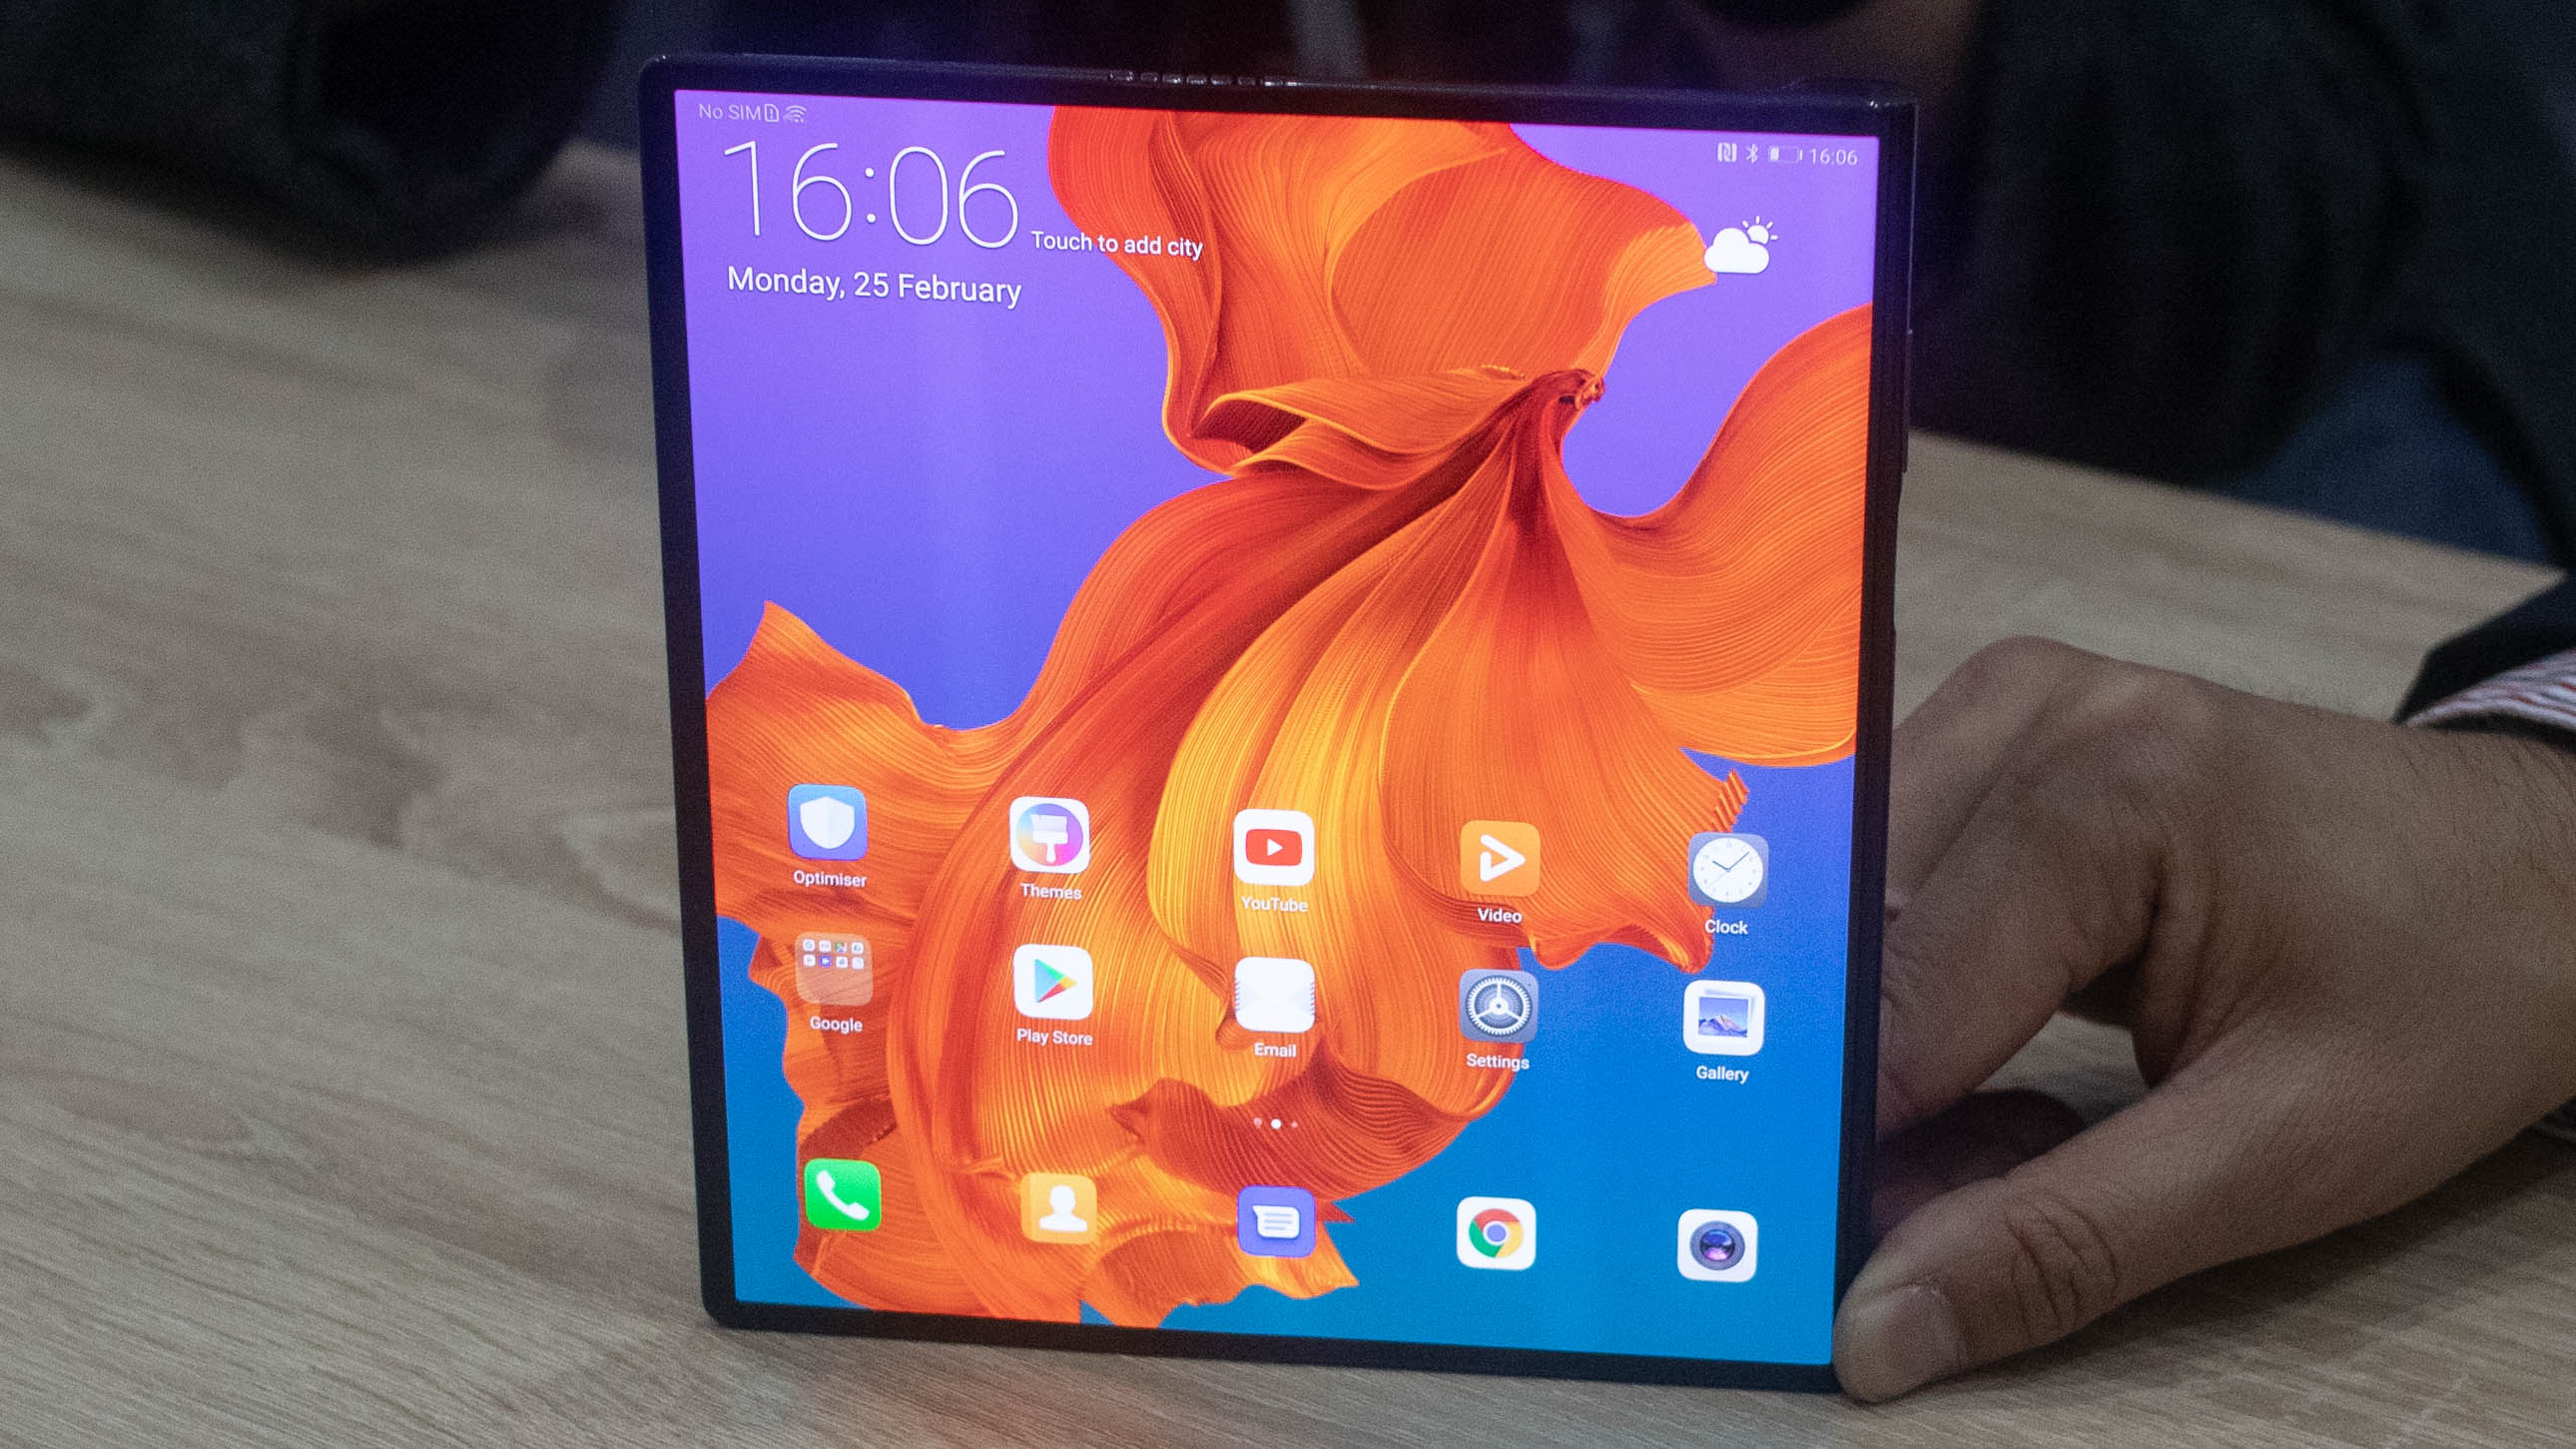 The 8-inch tablet screen